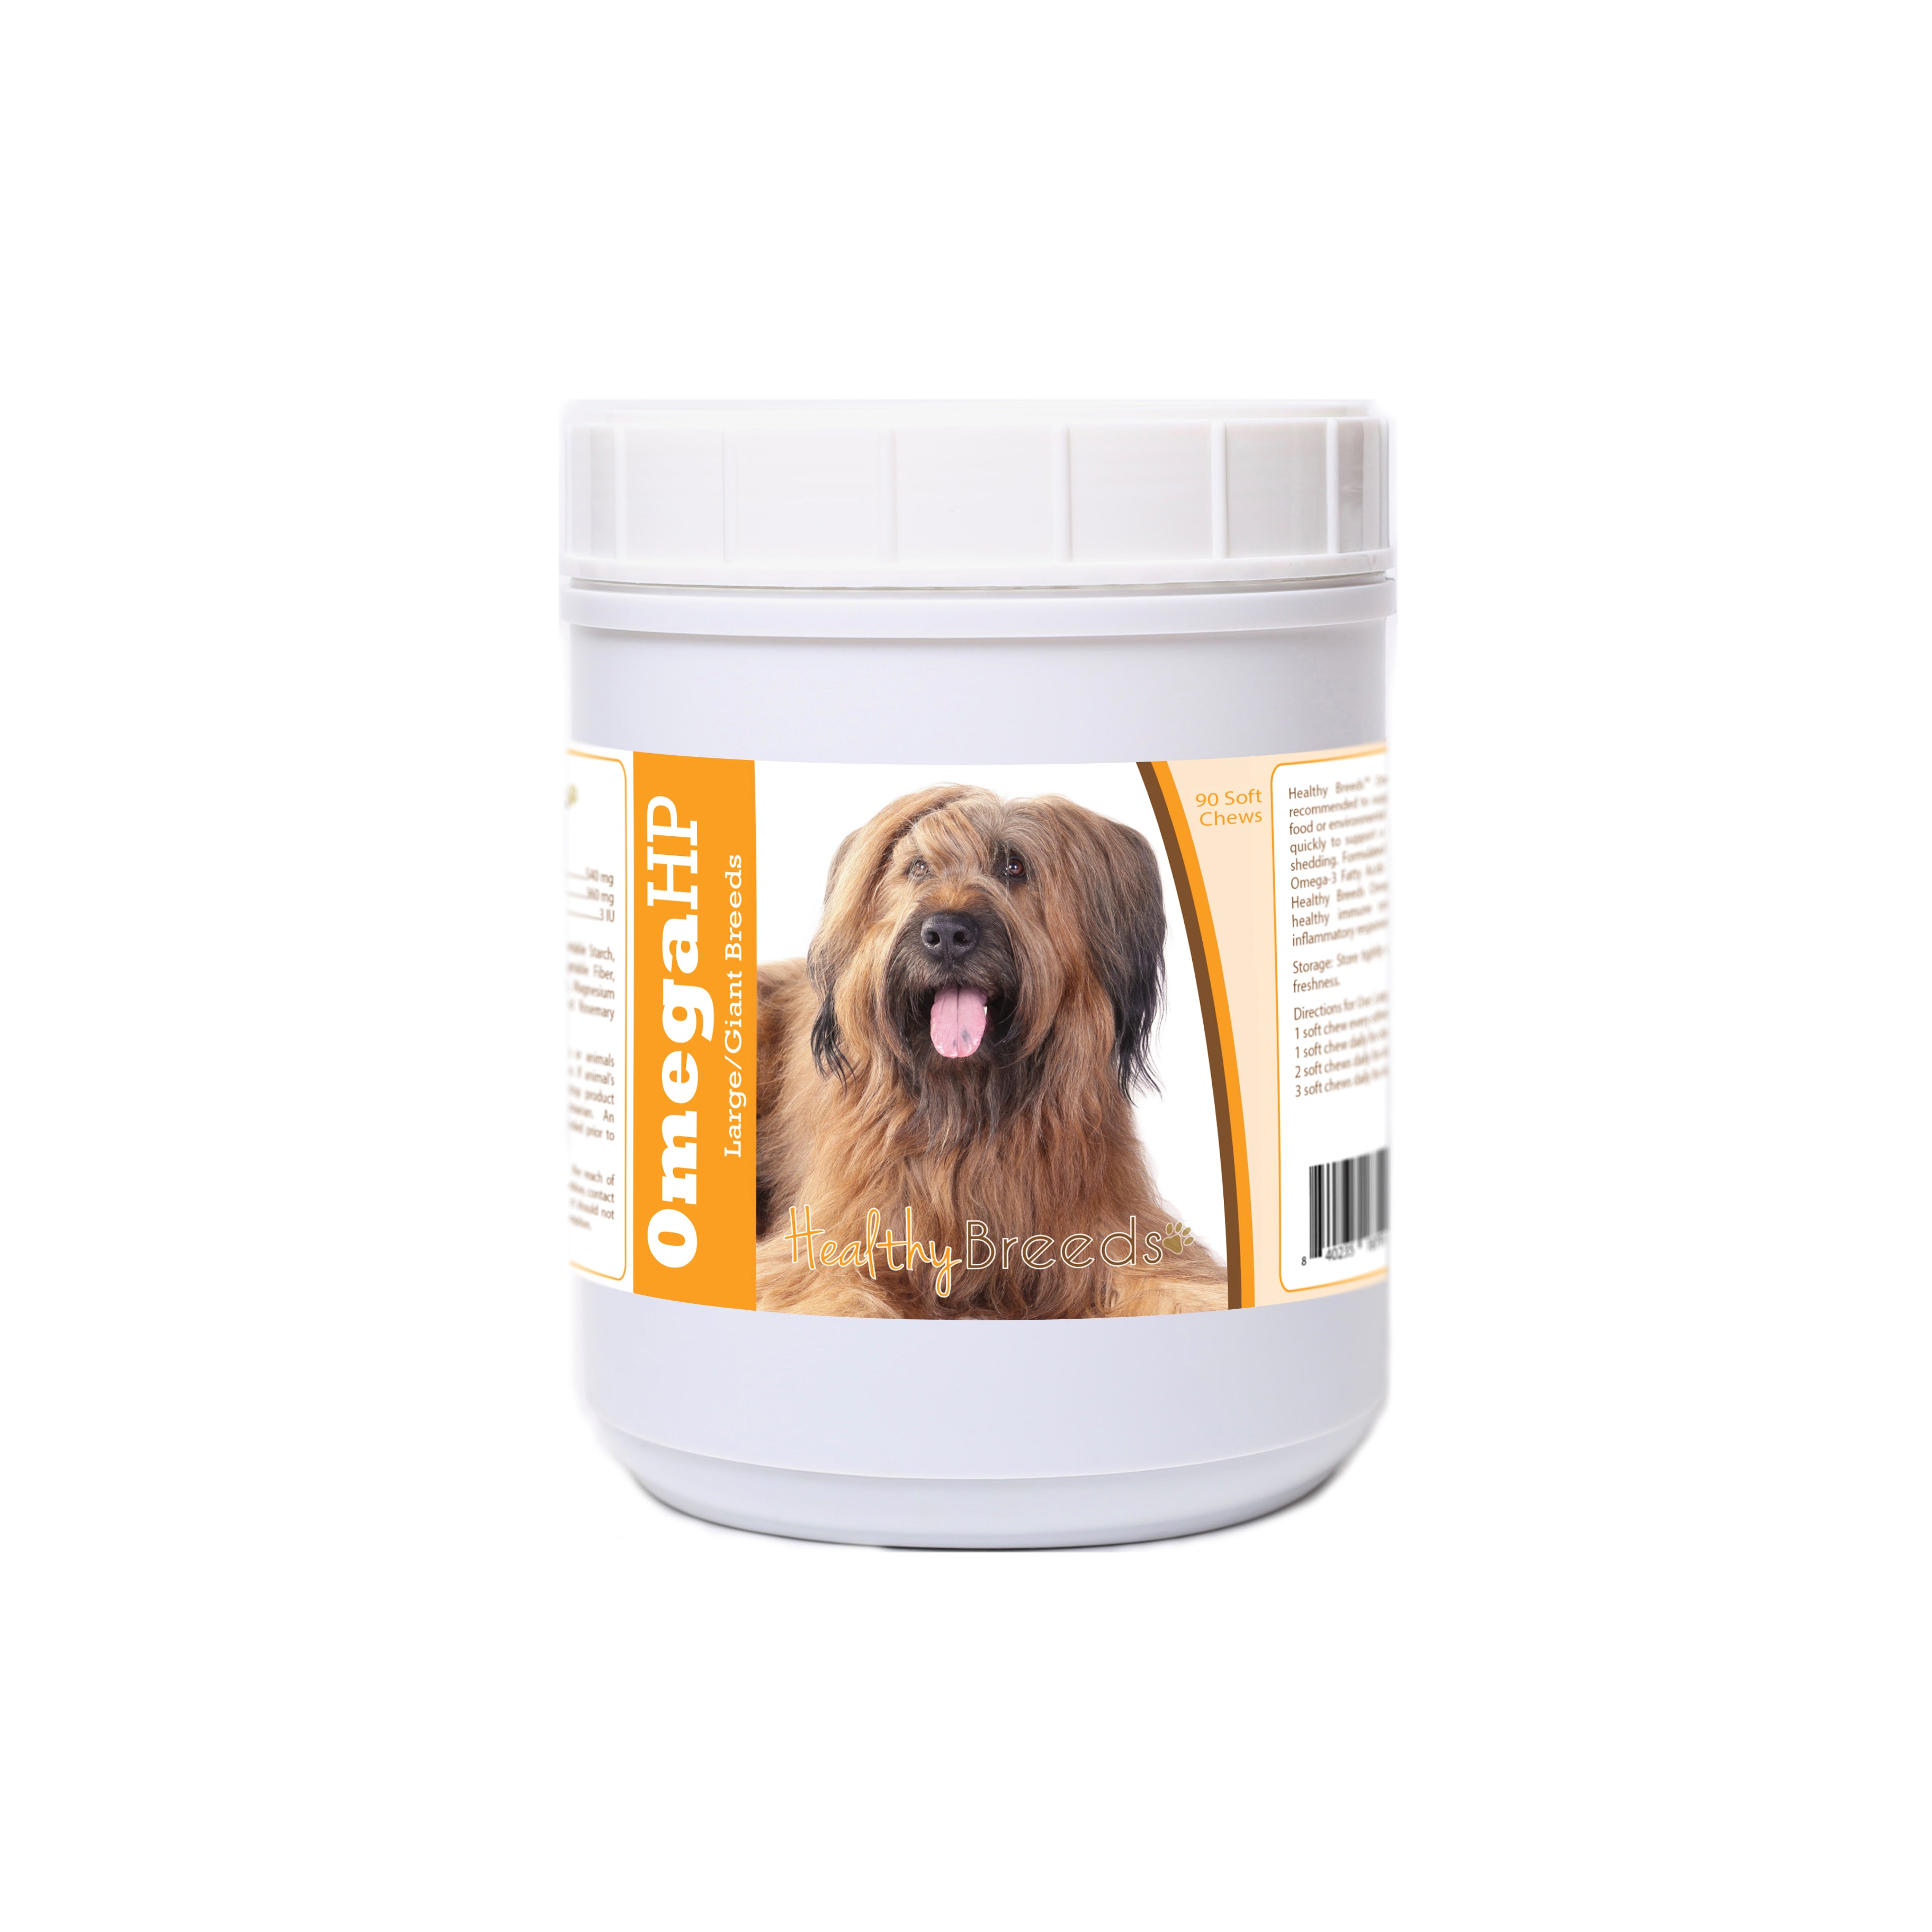 Briard Omega HP Fatty Acid Skin and Coat Support Soft Chews 90 Count